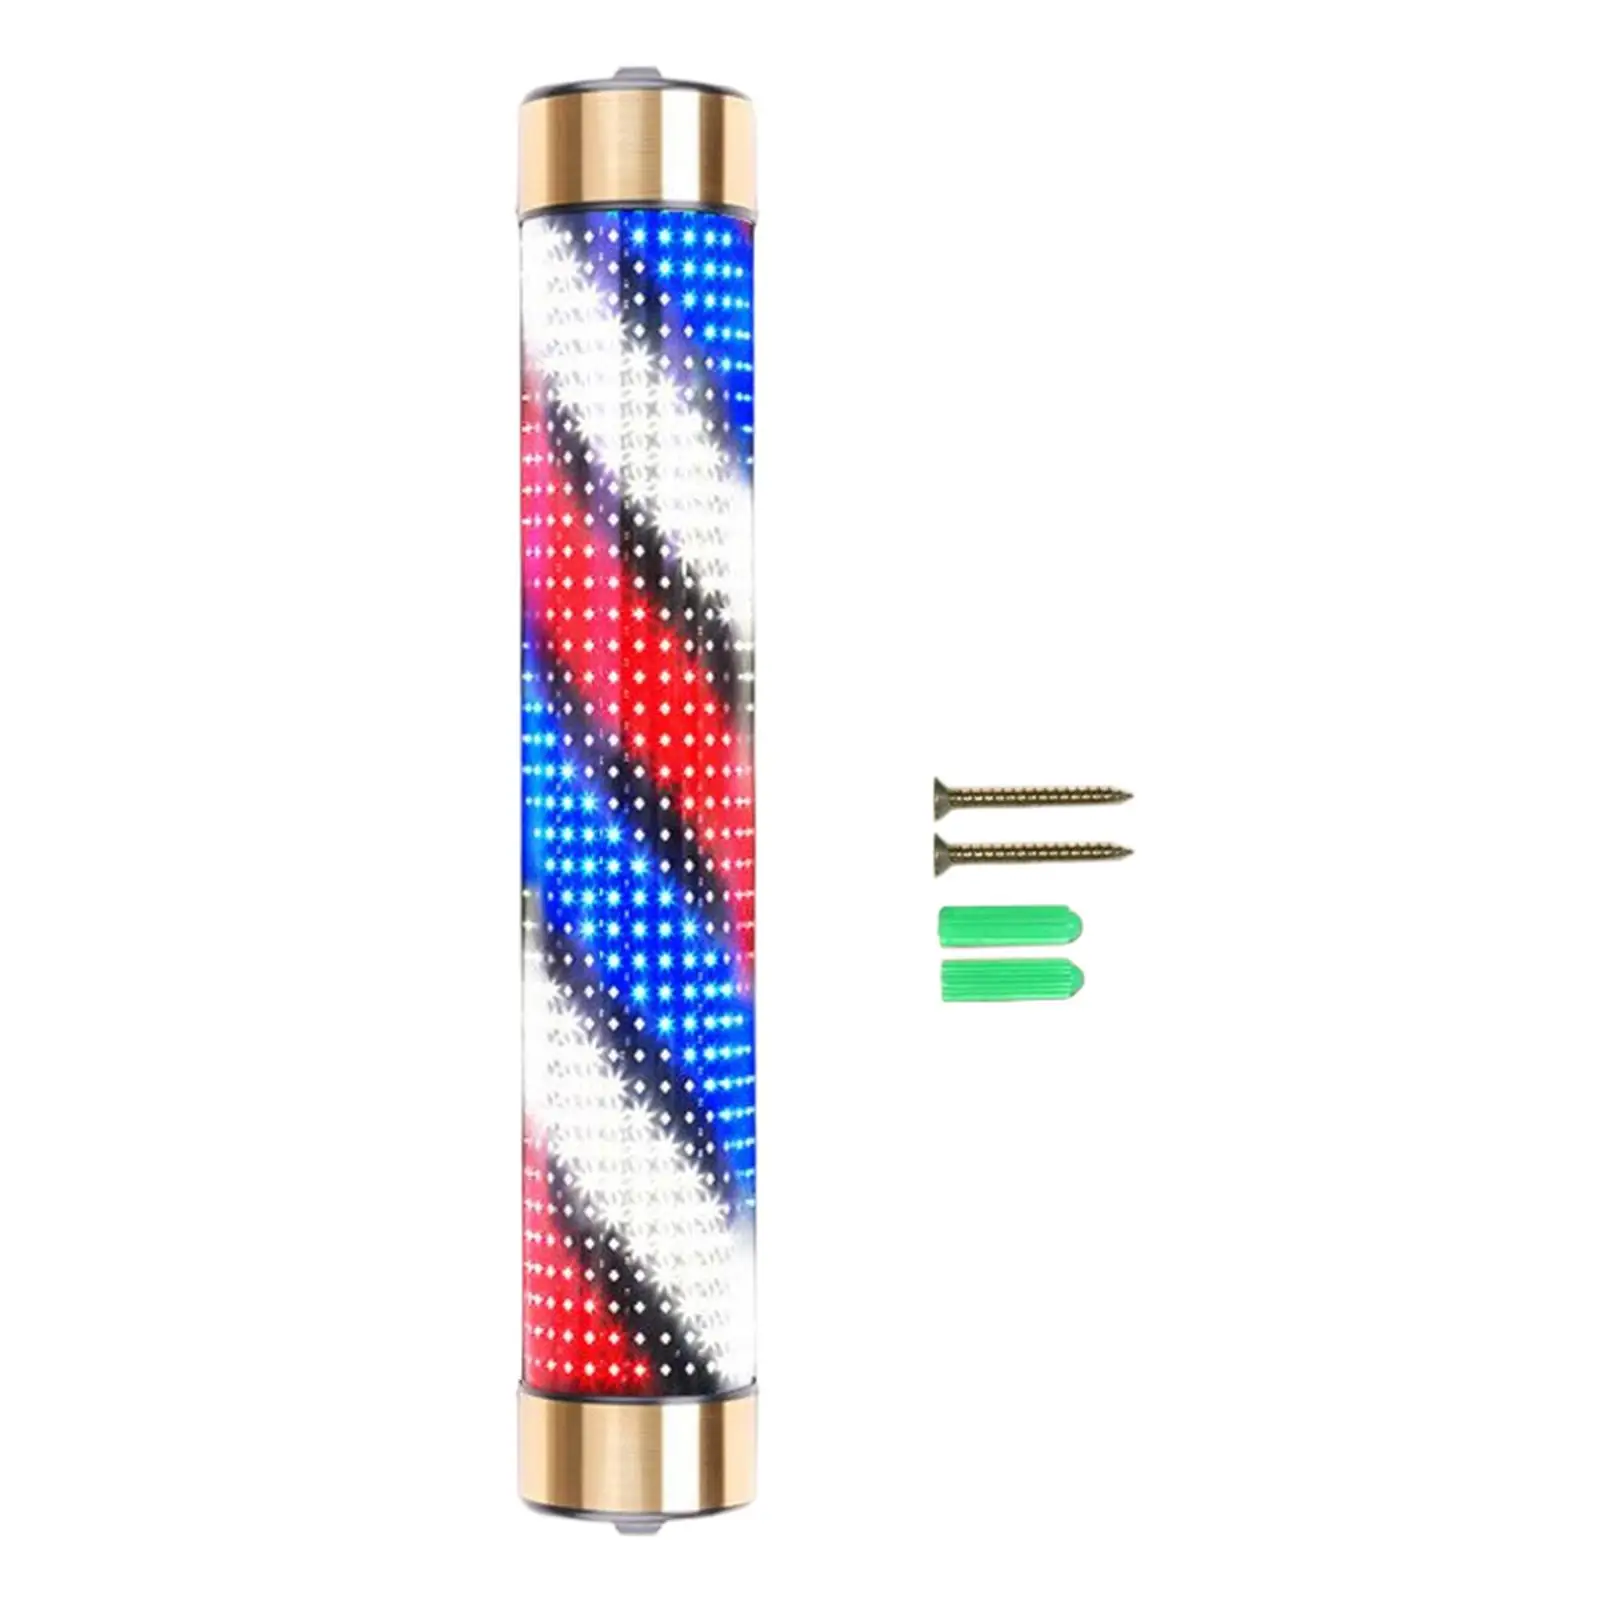 Waterproof Barber Shop Pole Rotating Light Hair Salon Indoor Neon Signs Wall Mounted Lighting Hairdressing Stripes Lights